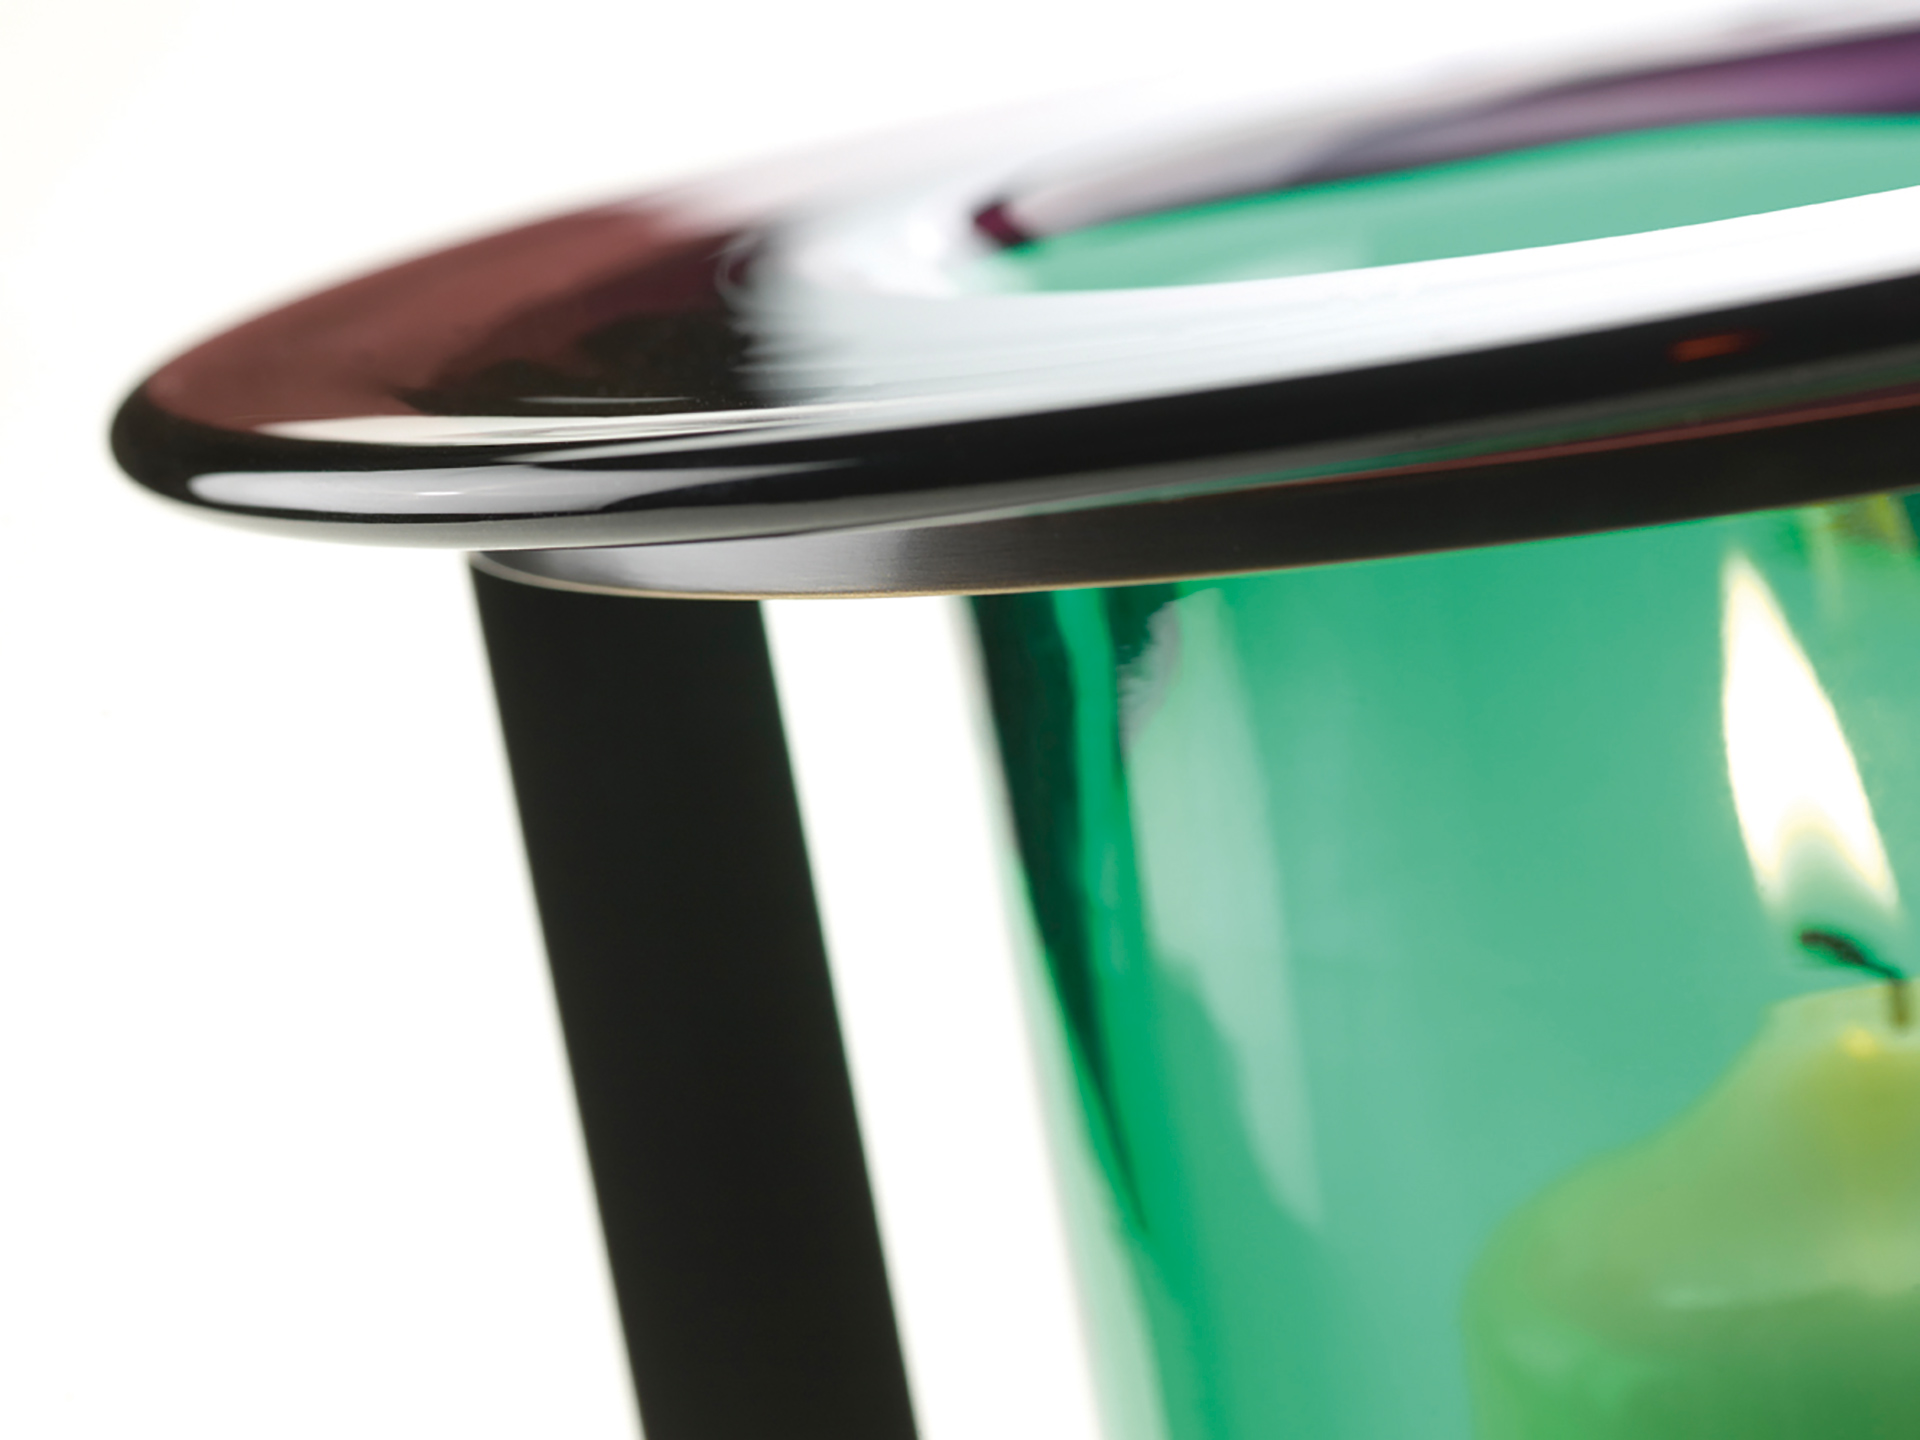 Detail of Vaso Canaletto, a Murano glass vase with bronze and Murano glass structure, available in different colors, from Promemoria's catalogue | Promemoria